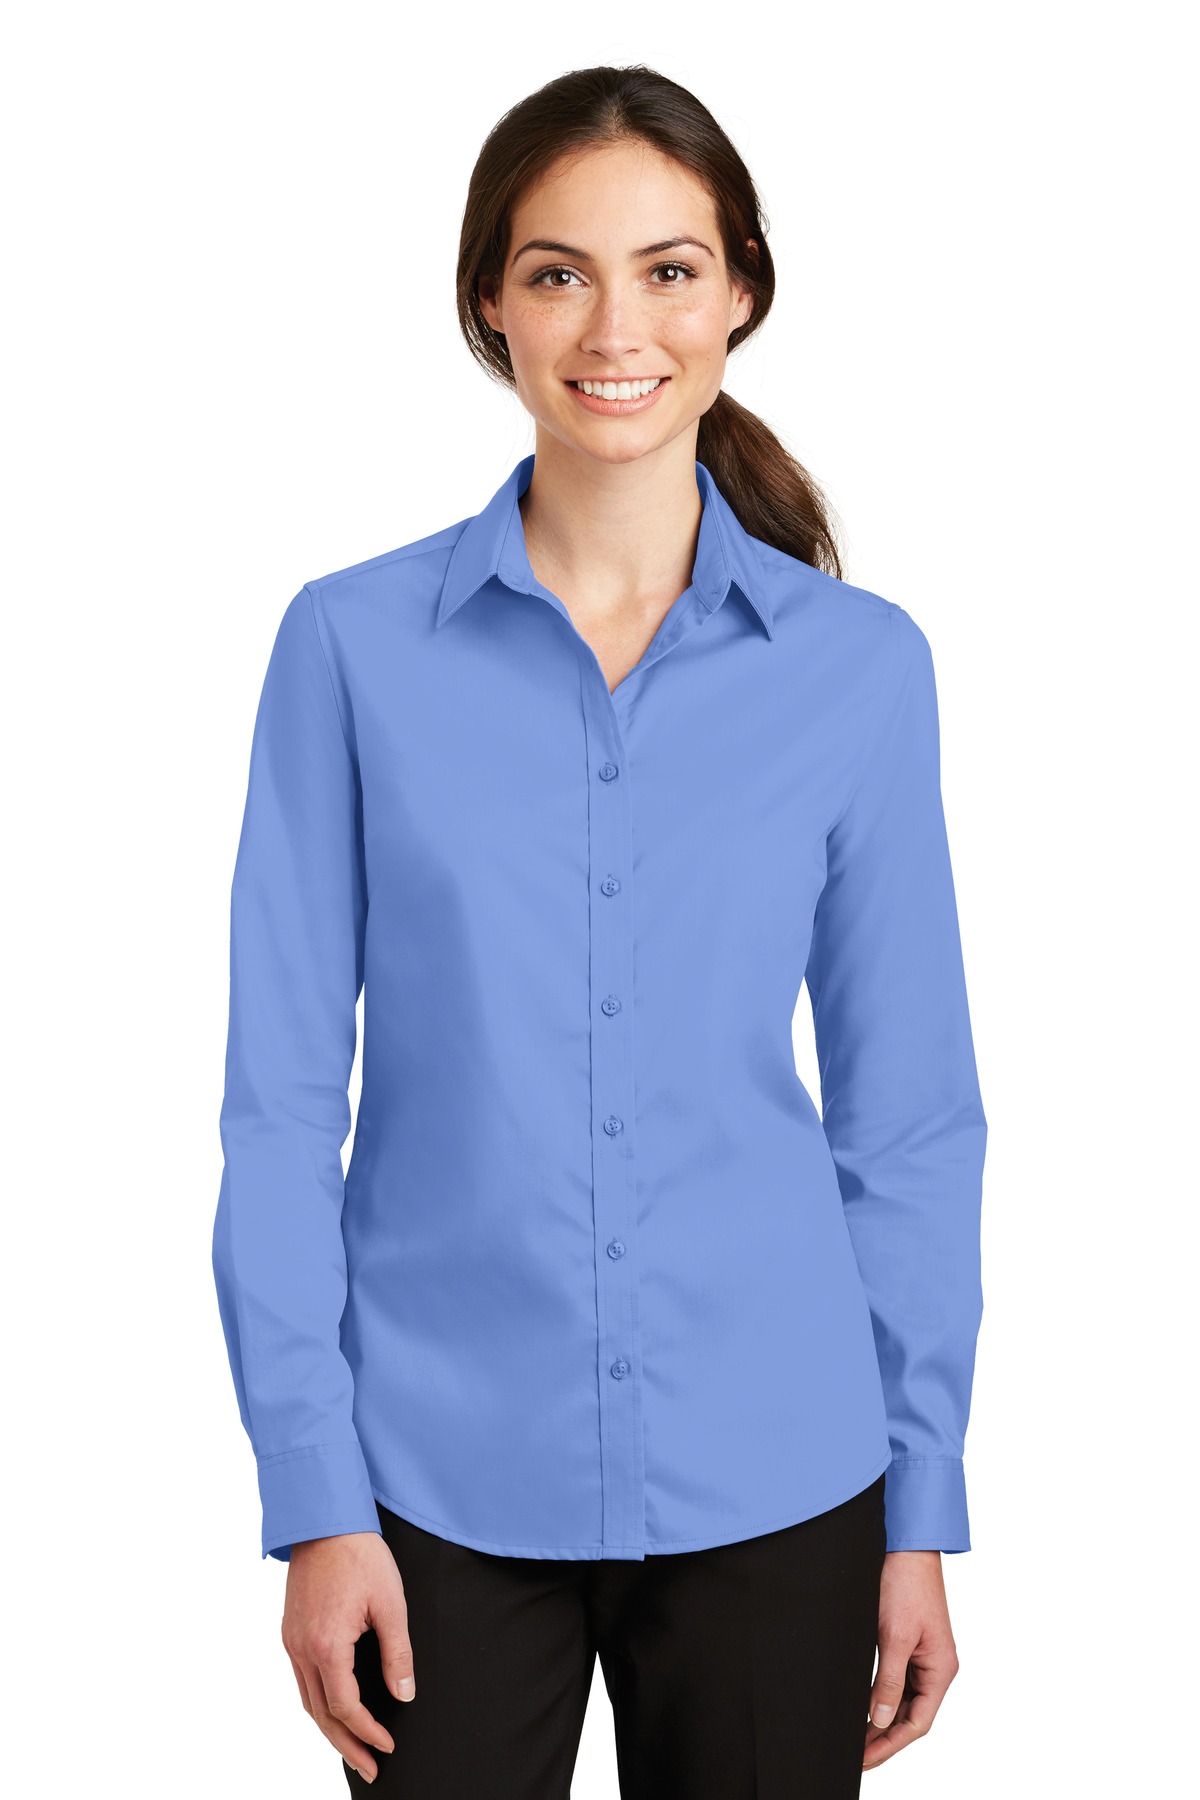 Port Authority Ladies Woven Shirts for Hospitality- ® Ladies SuperPro Twill Shirt.-Port Authority